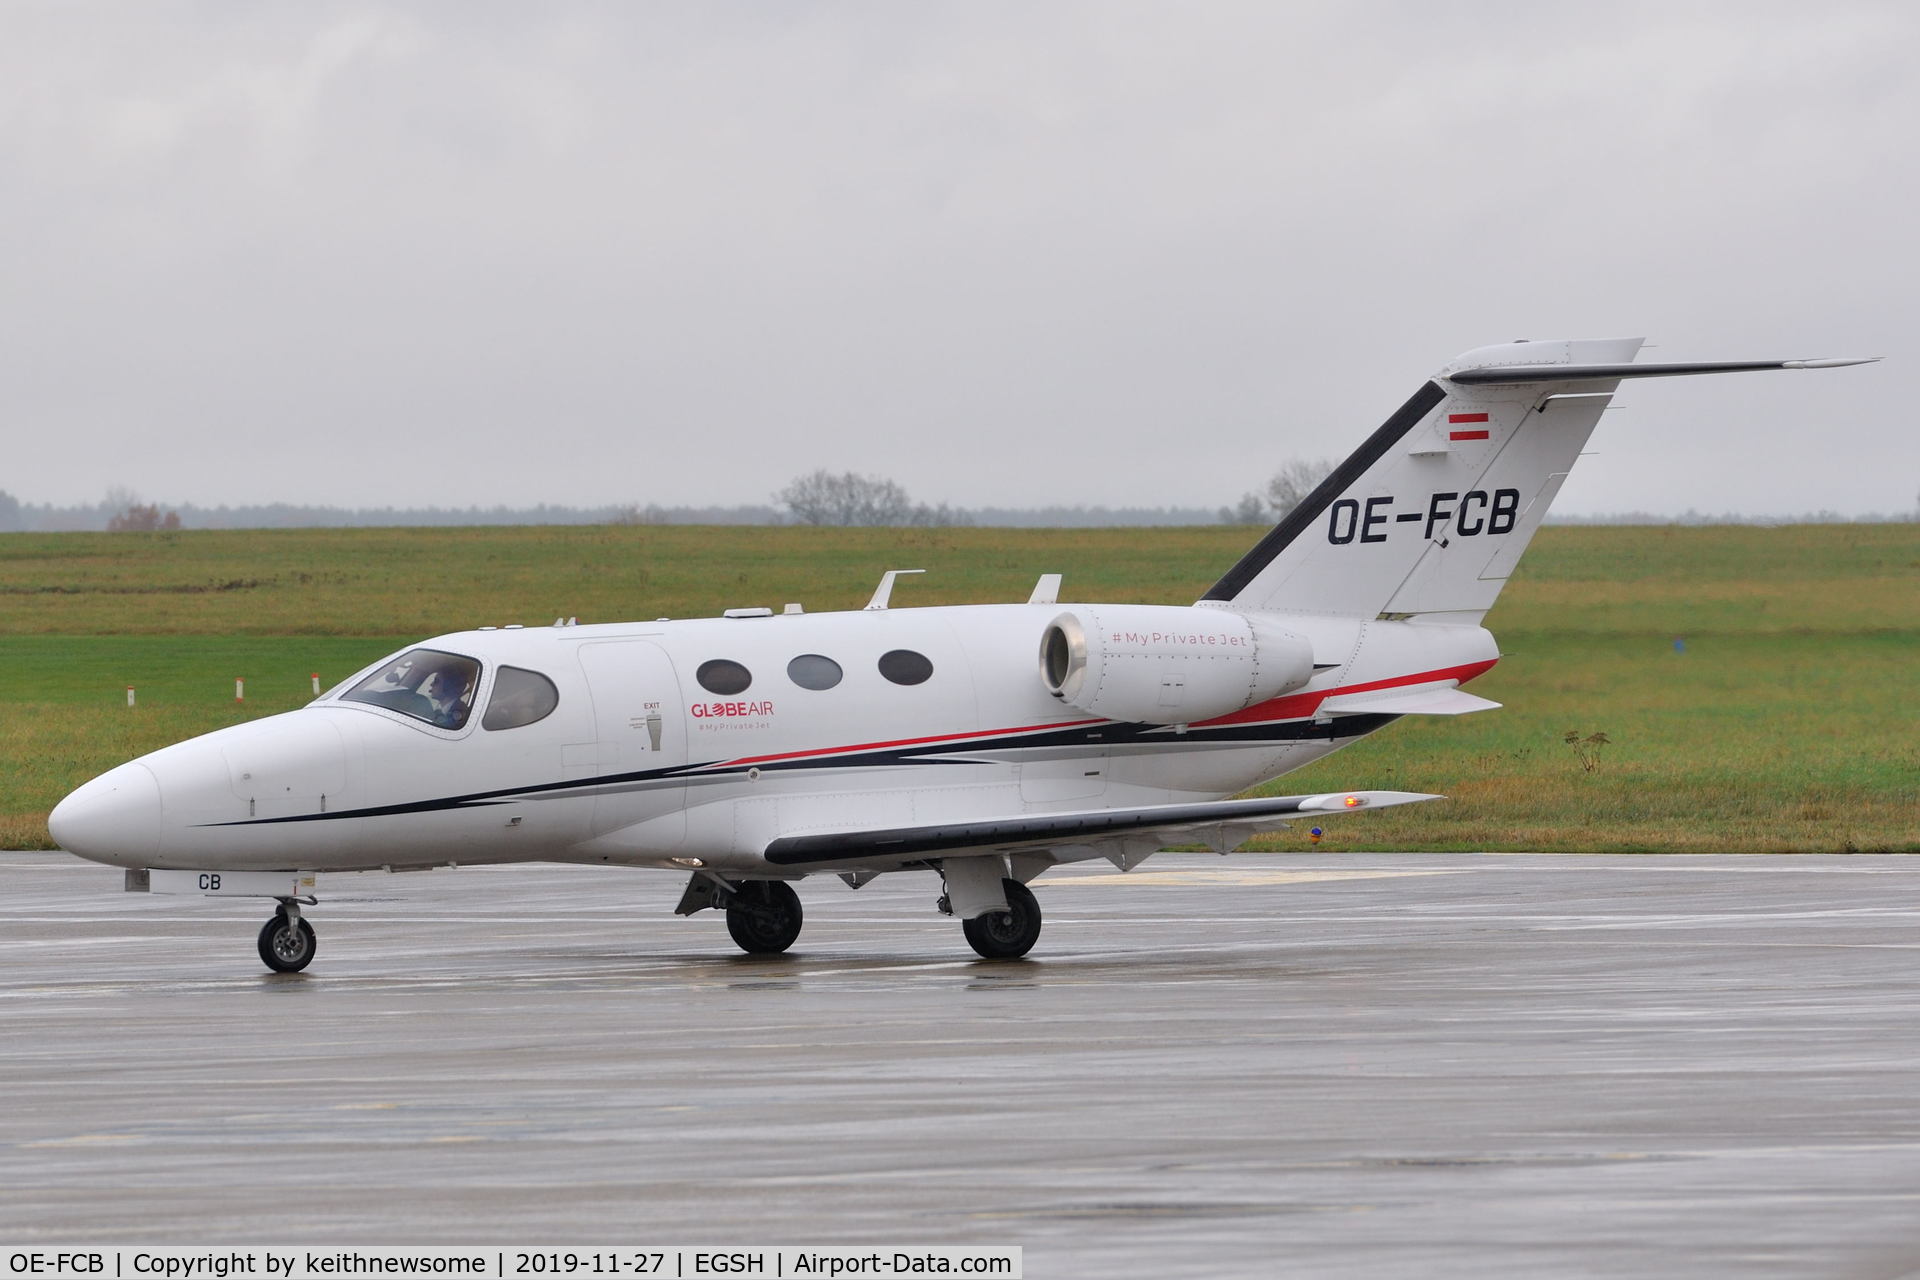 OE-FCB, 2008 Cessna 510 Citation Mustang Citation Mustang C/N 510-0044, Arriving at Norwich from Paris Le Bourget.